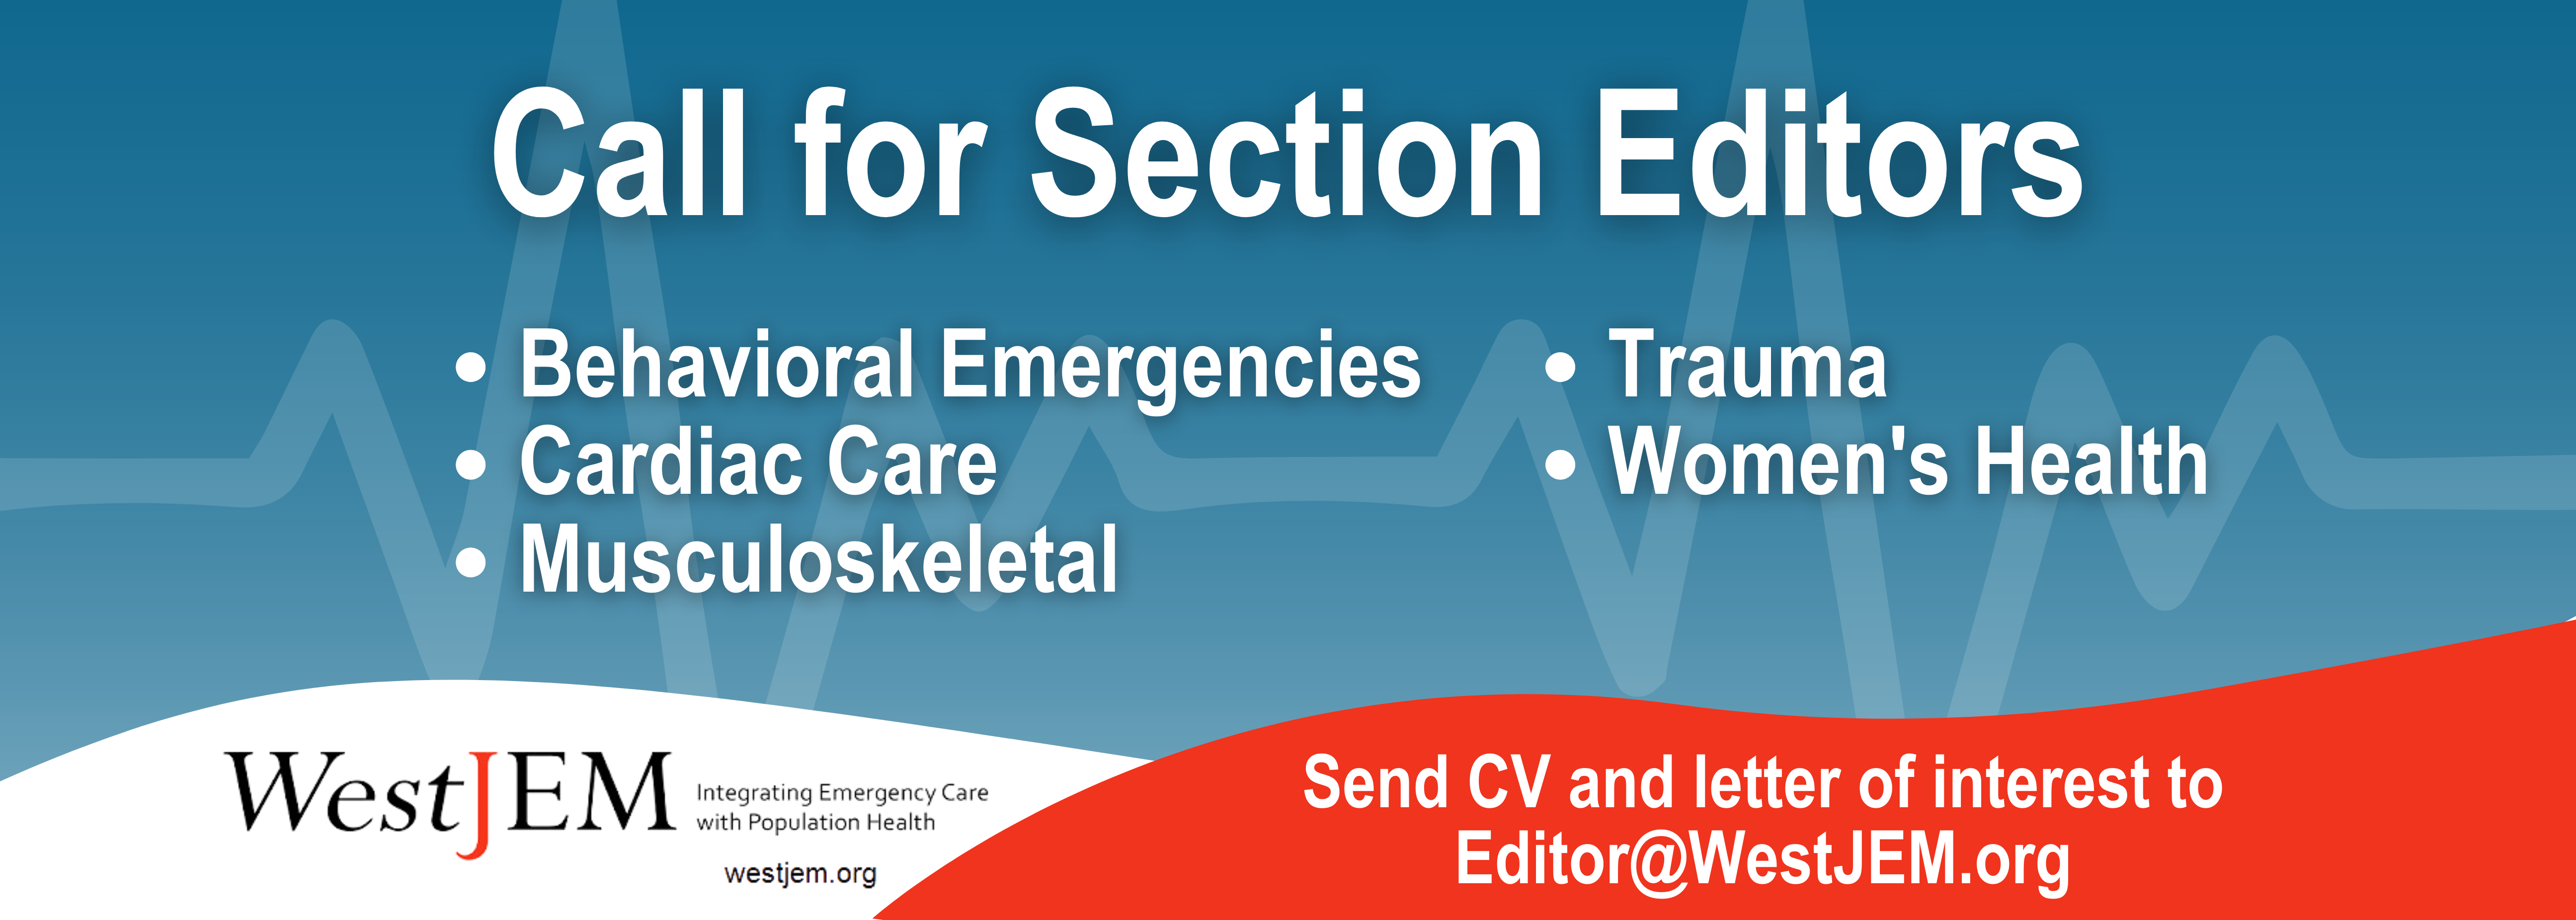 Call-for-Section-Editors-04.01.24